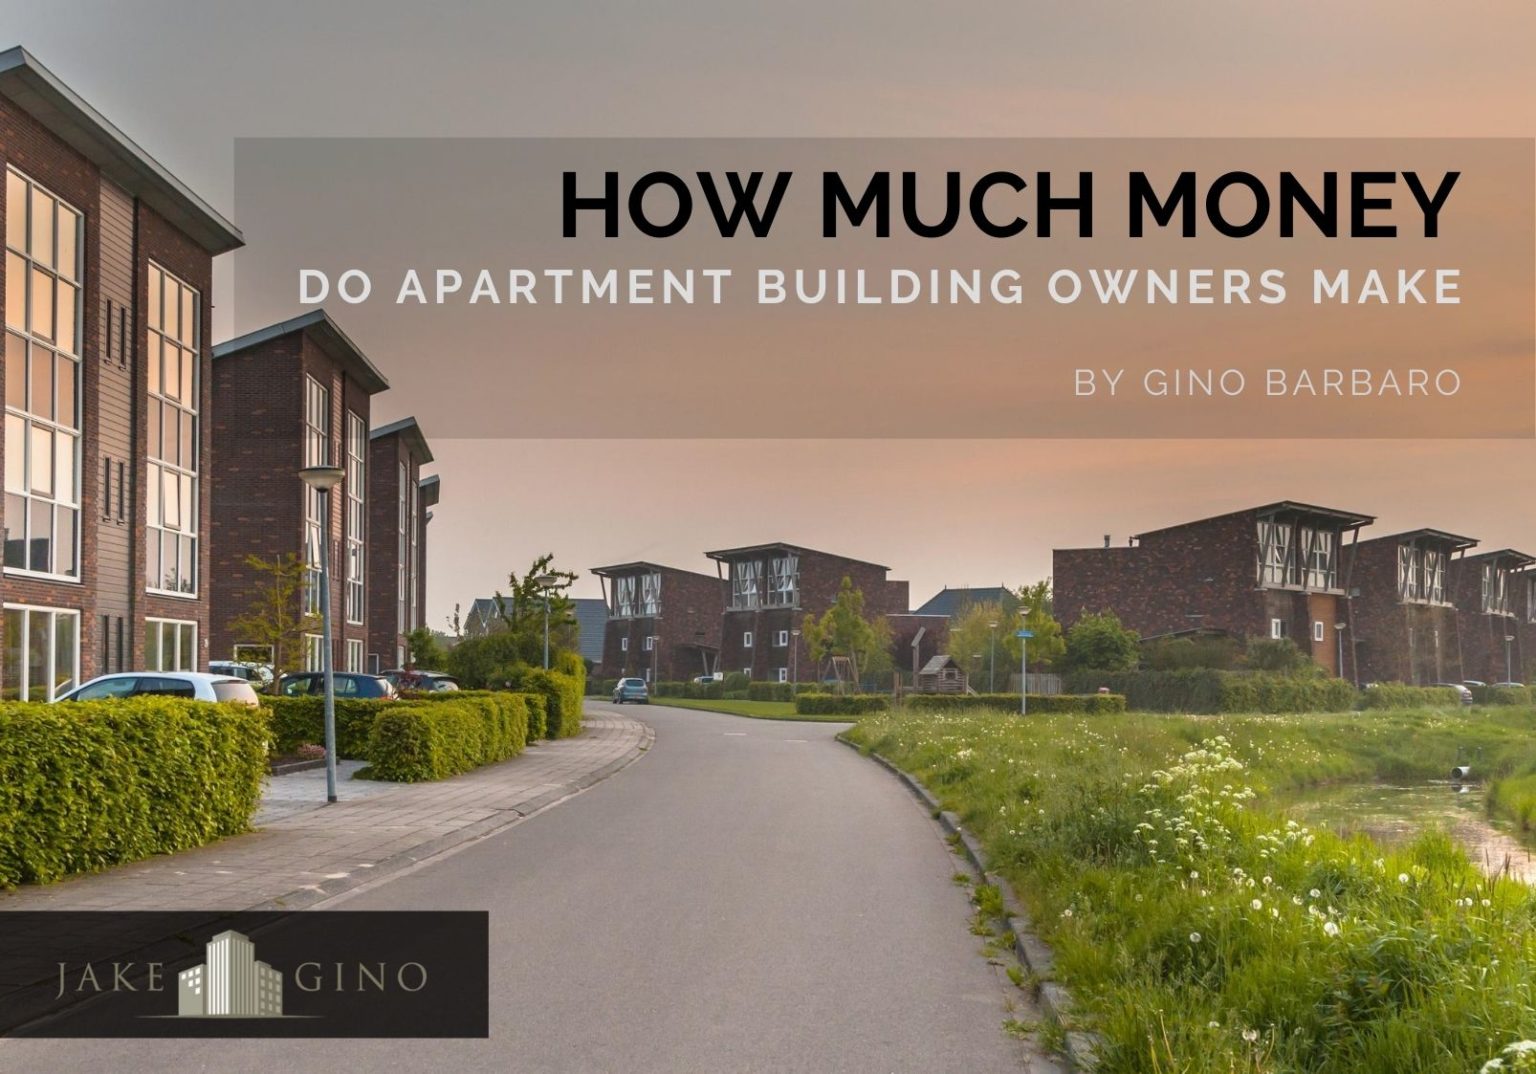 How Much Money Do Apartment Building Owners Make | Jake & Gino